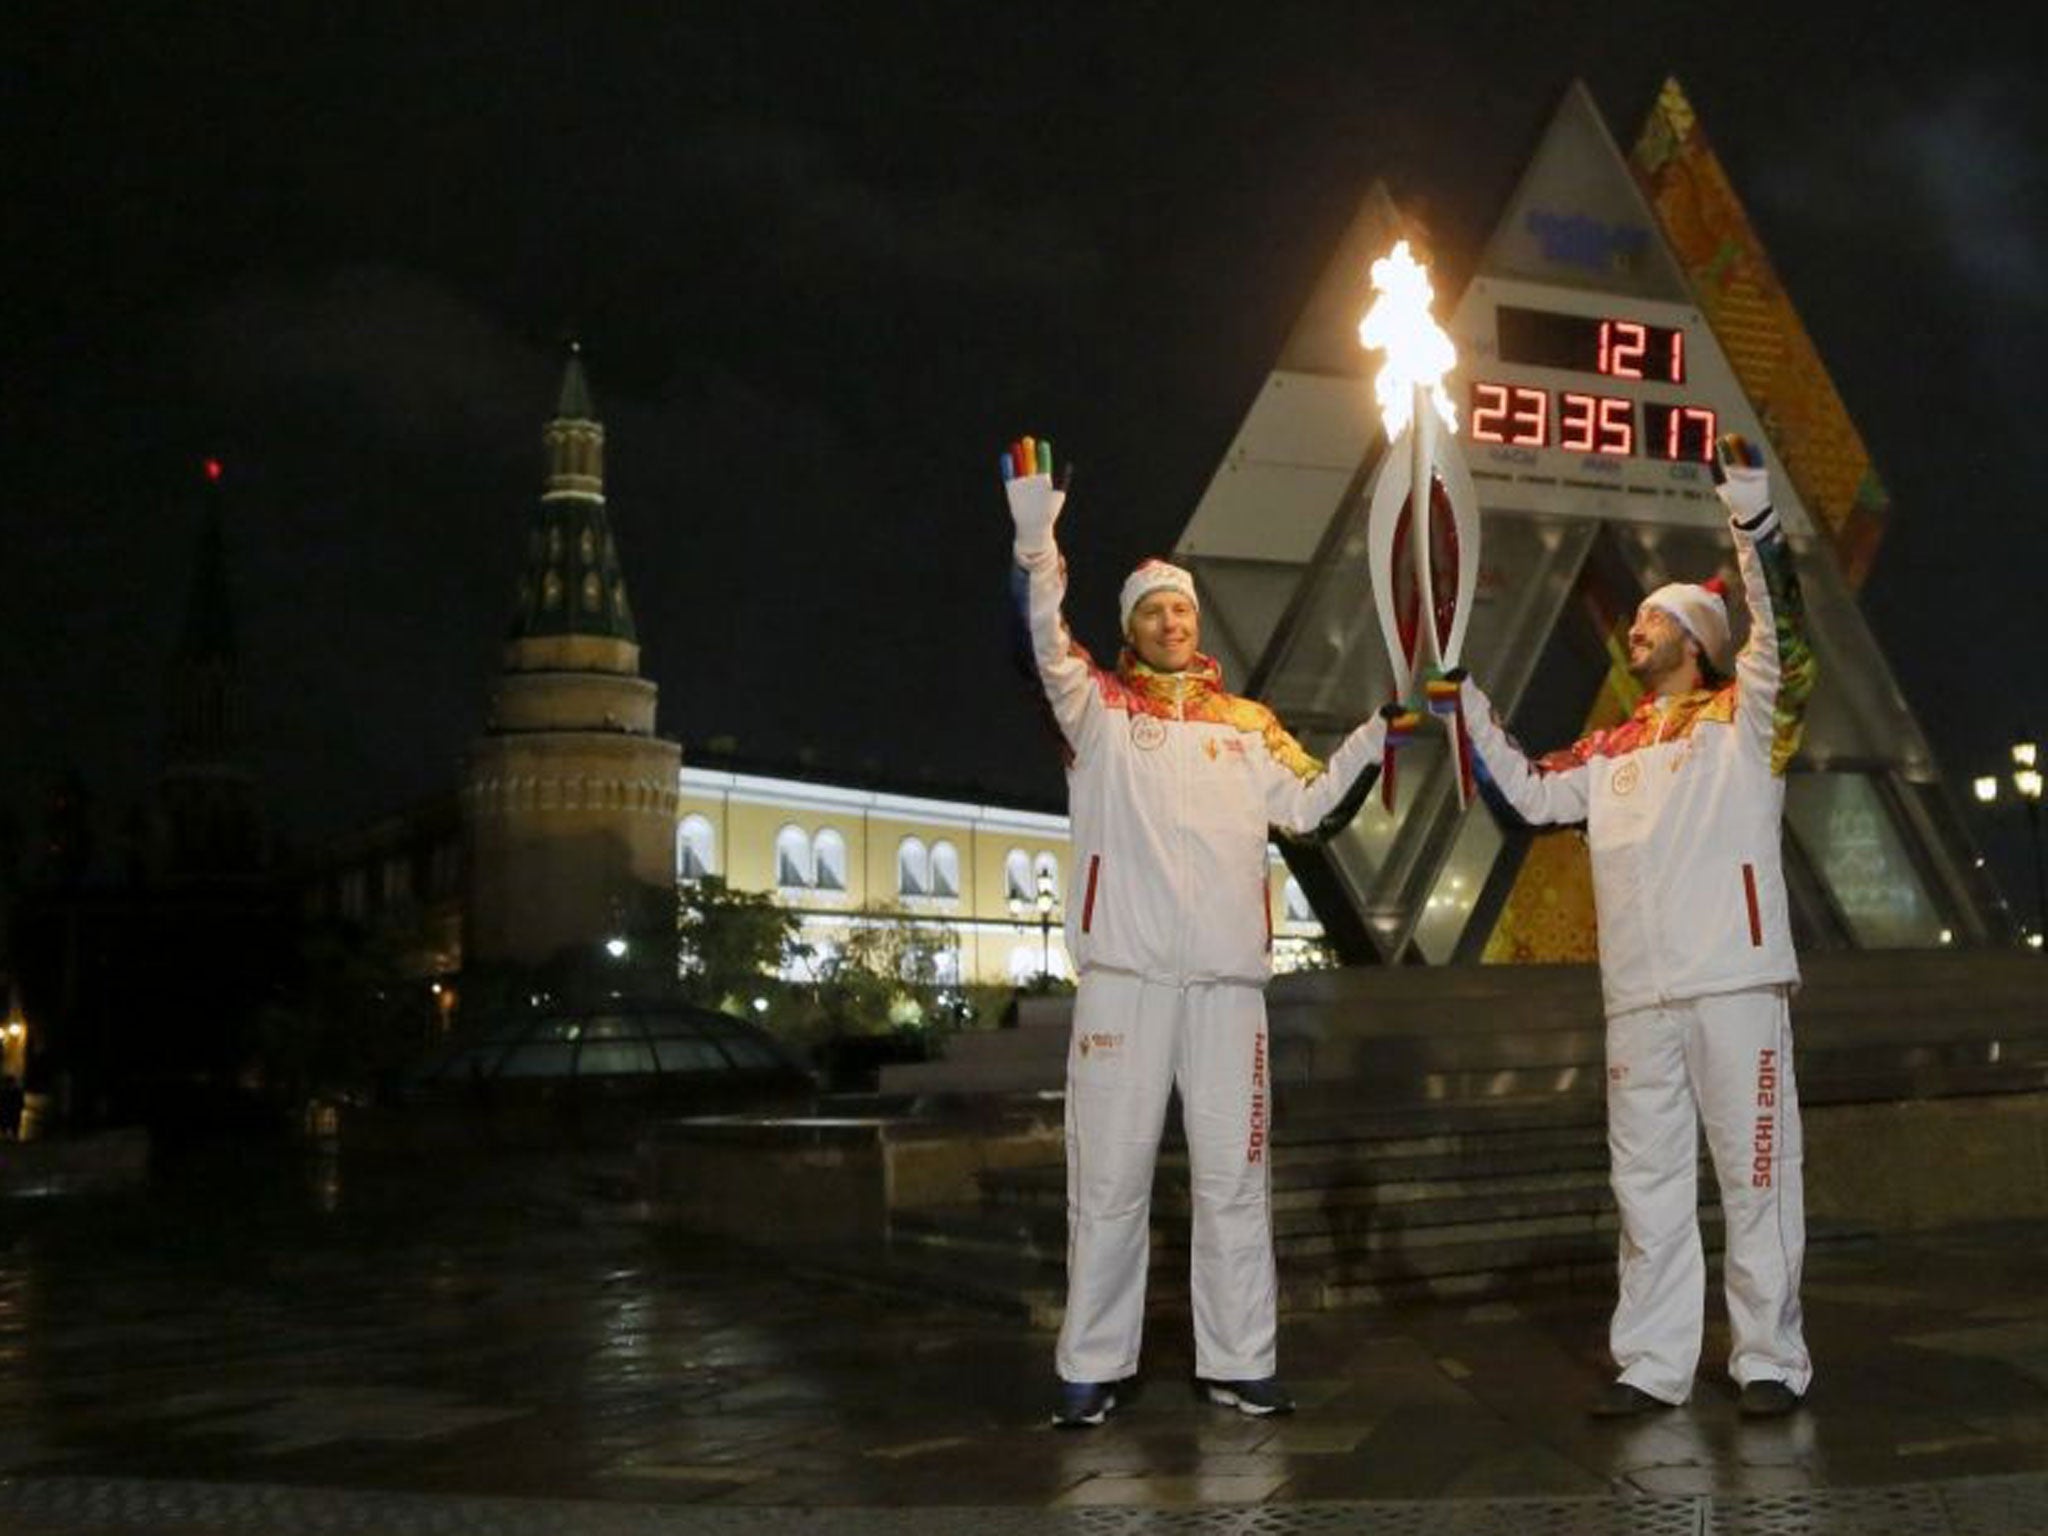 False start? Wrong weather may turn the Sochi Games into a damp squib